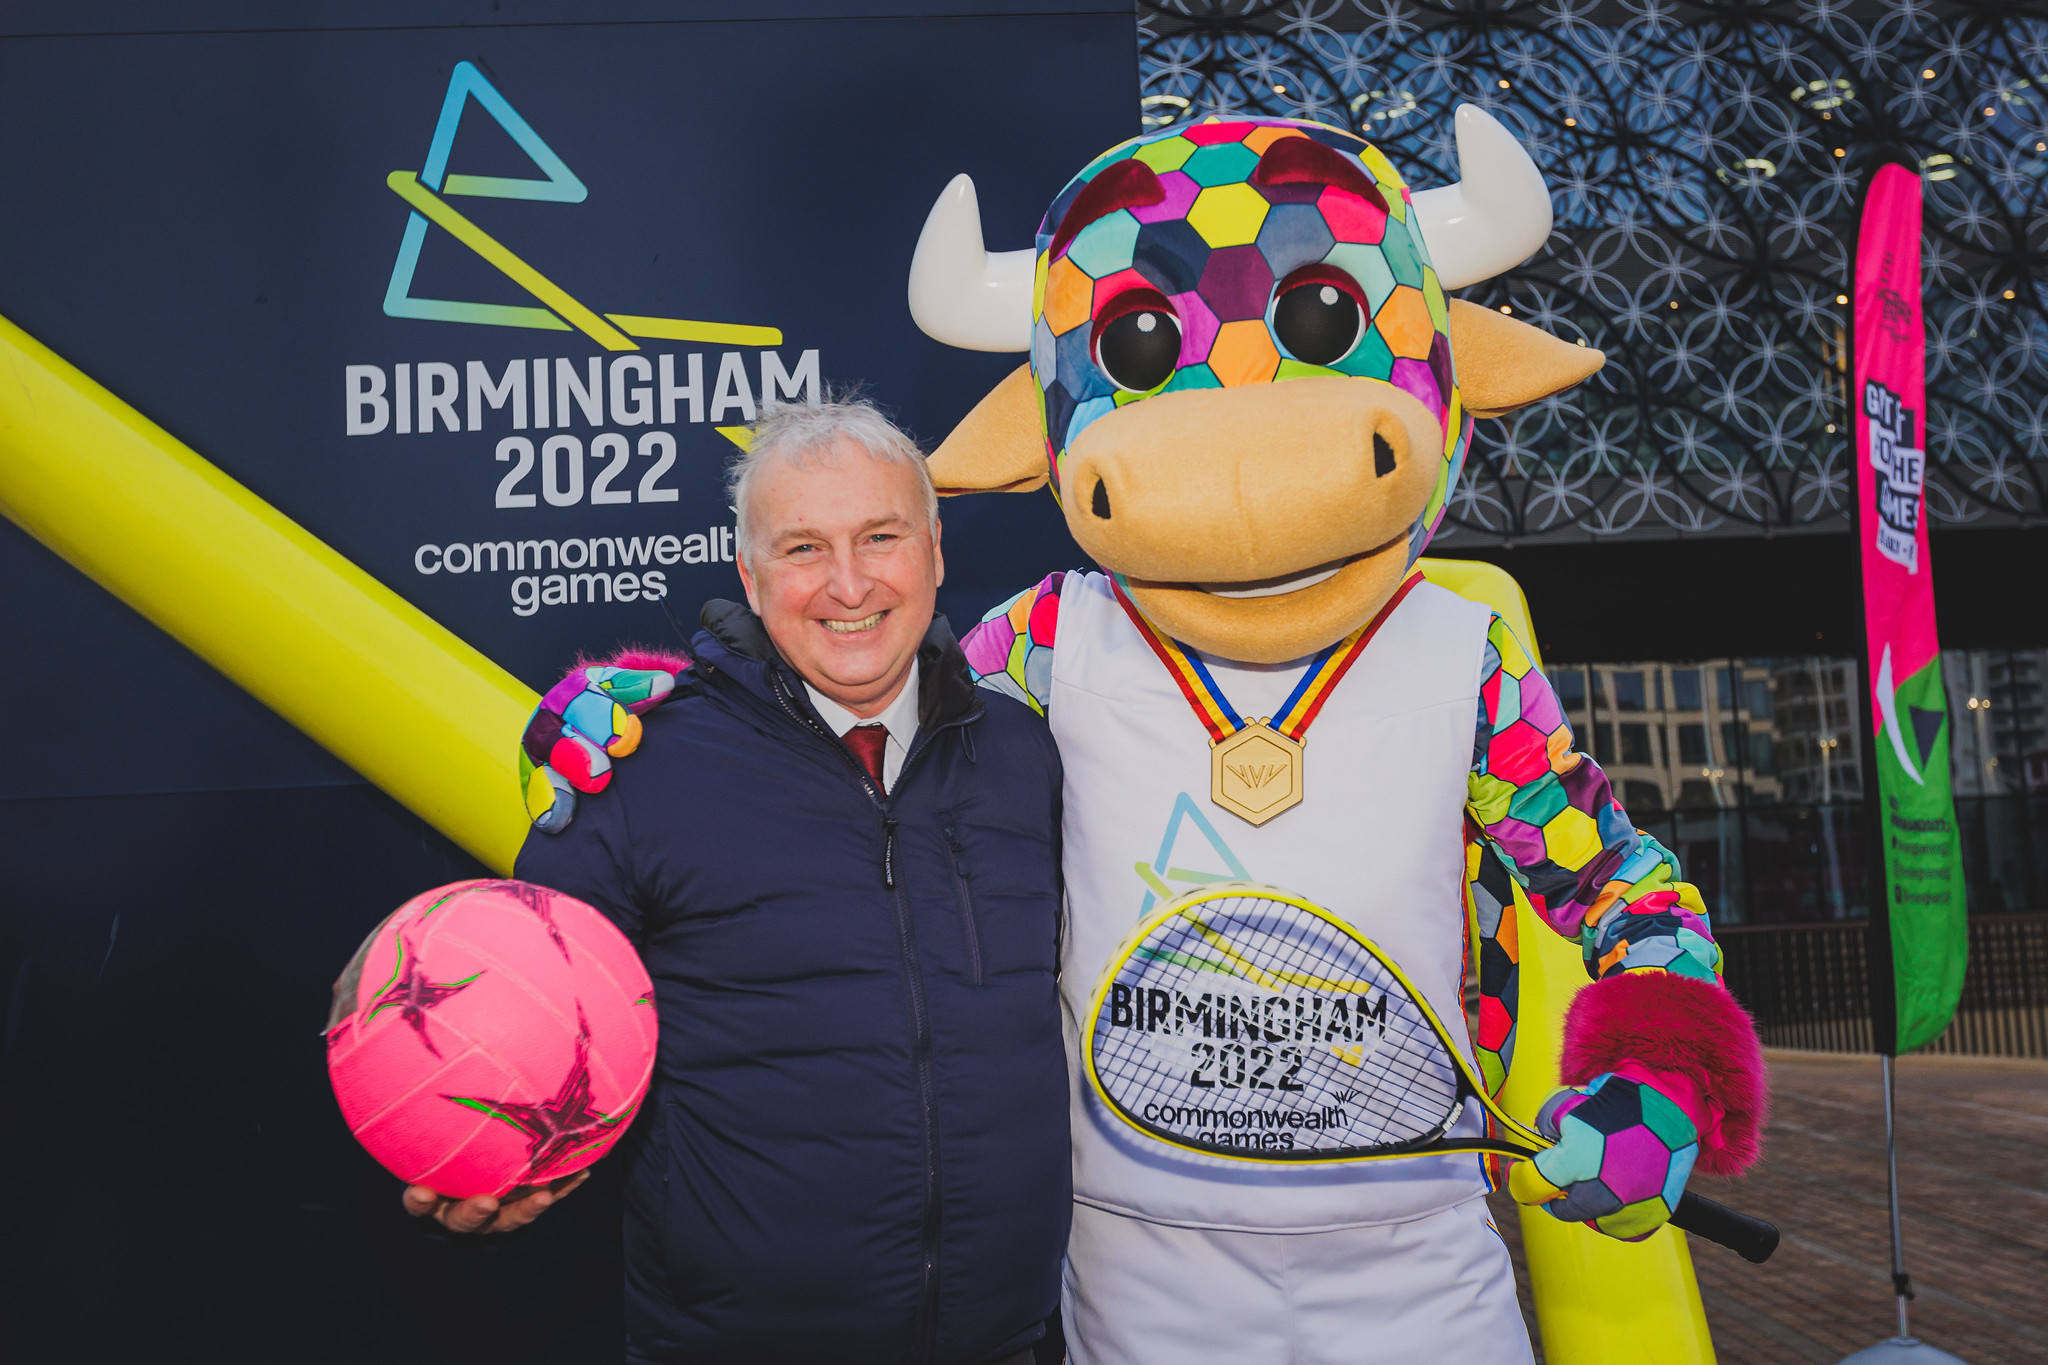 Birmingham 2022 sets major event blueprint and other hosts "following our lead", Ward claims